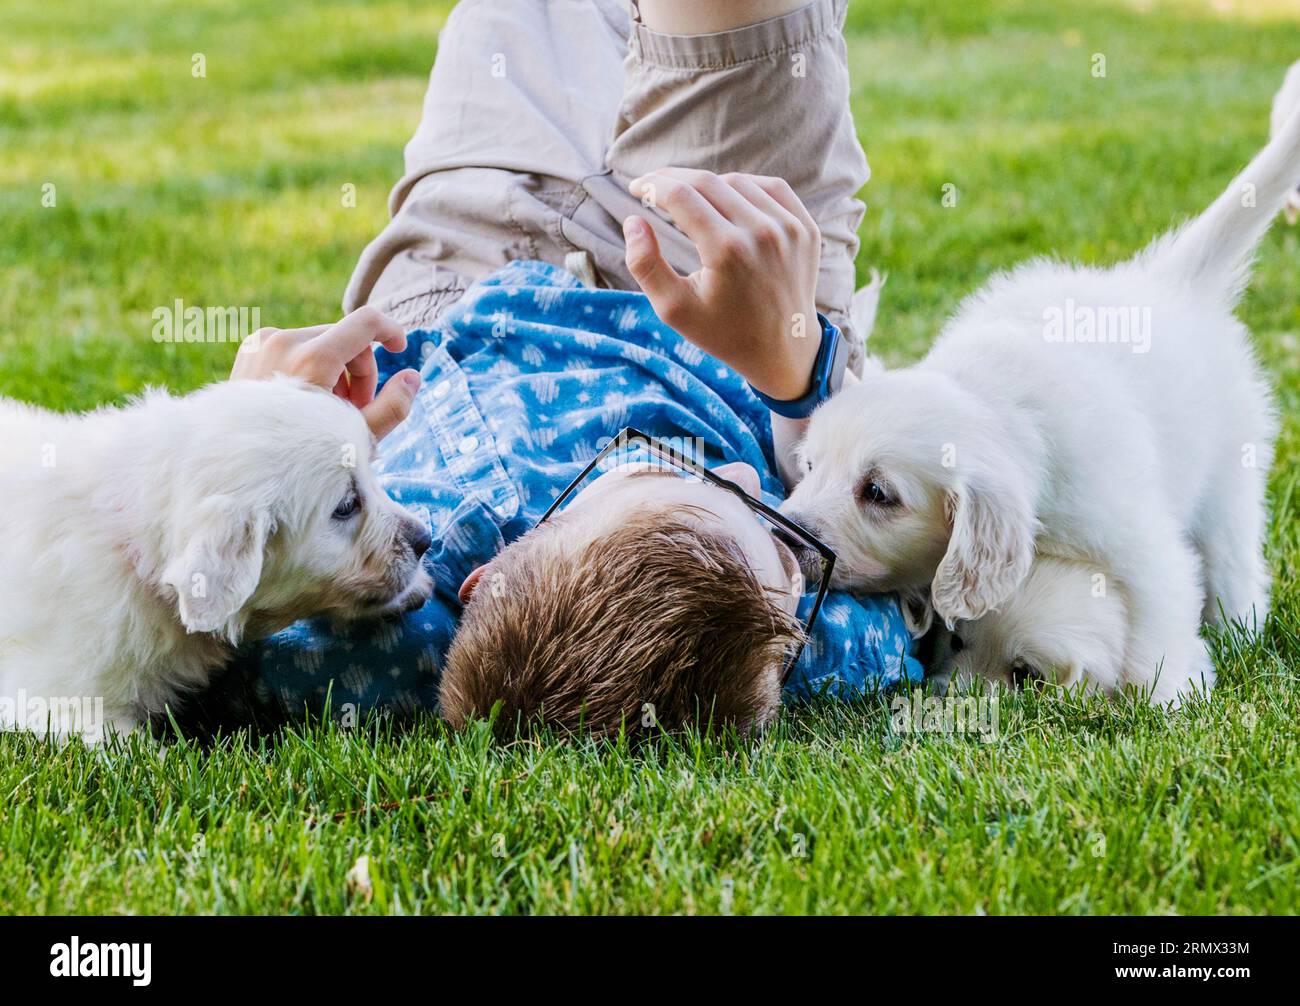 Young boy playing outside on lawn with Platinum, or Cream colored Golden Retriever puppies Stock Photo